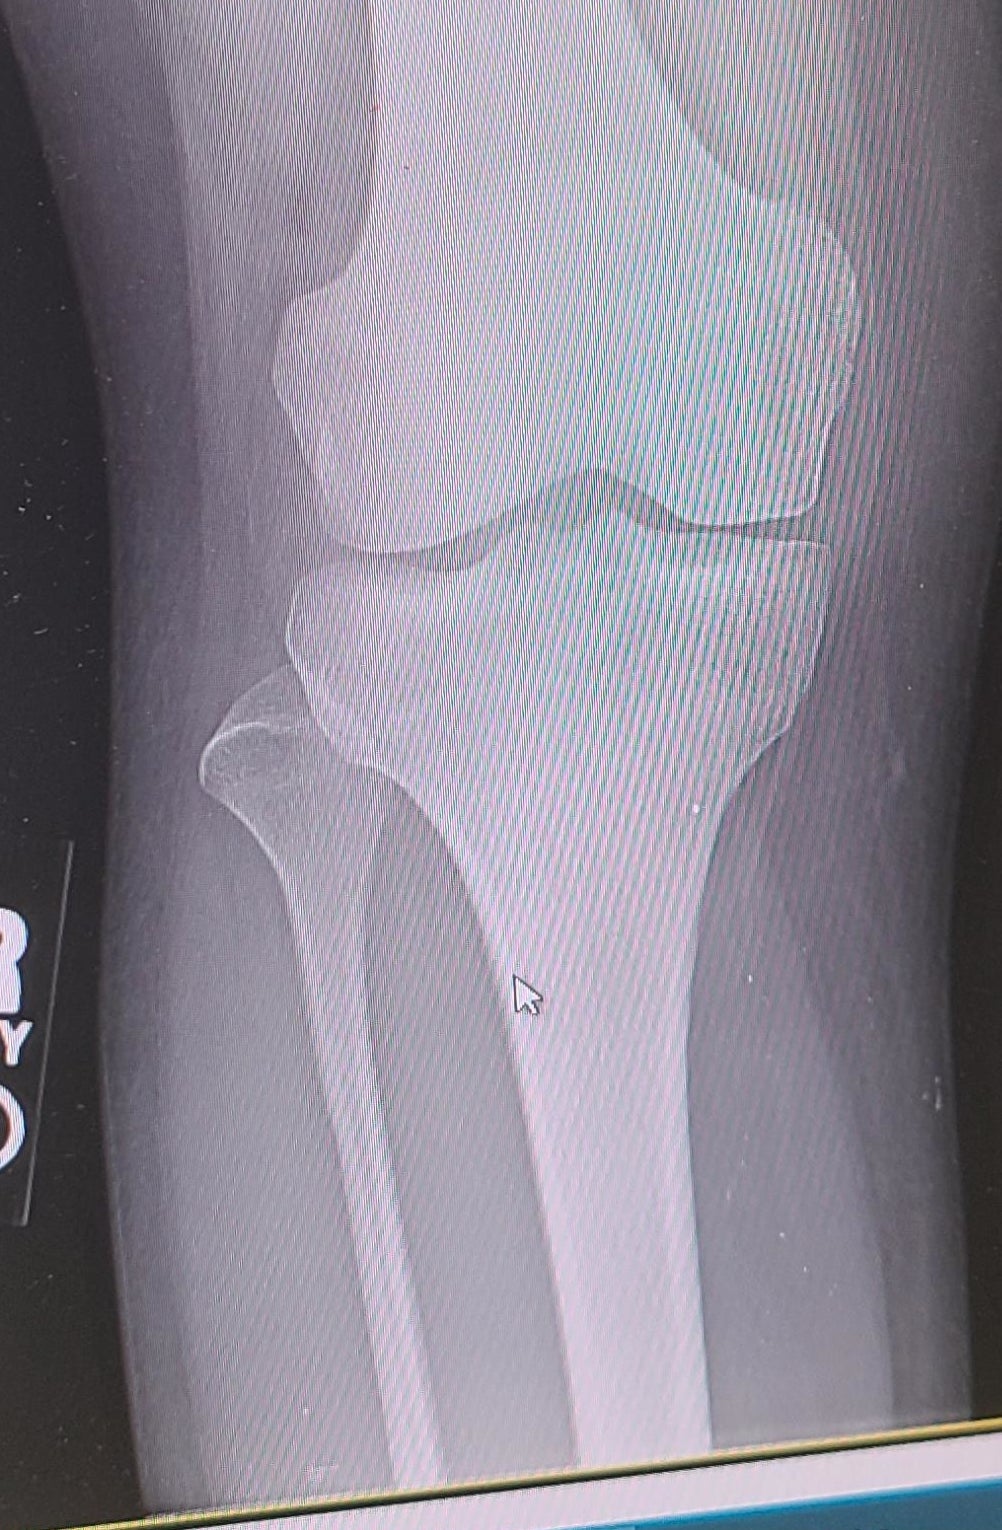 X-ray of a human knee joint with cursor arrow pointing to the area between femur and tibia